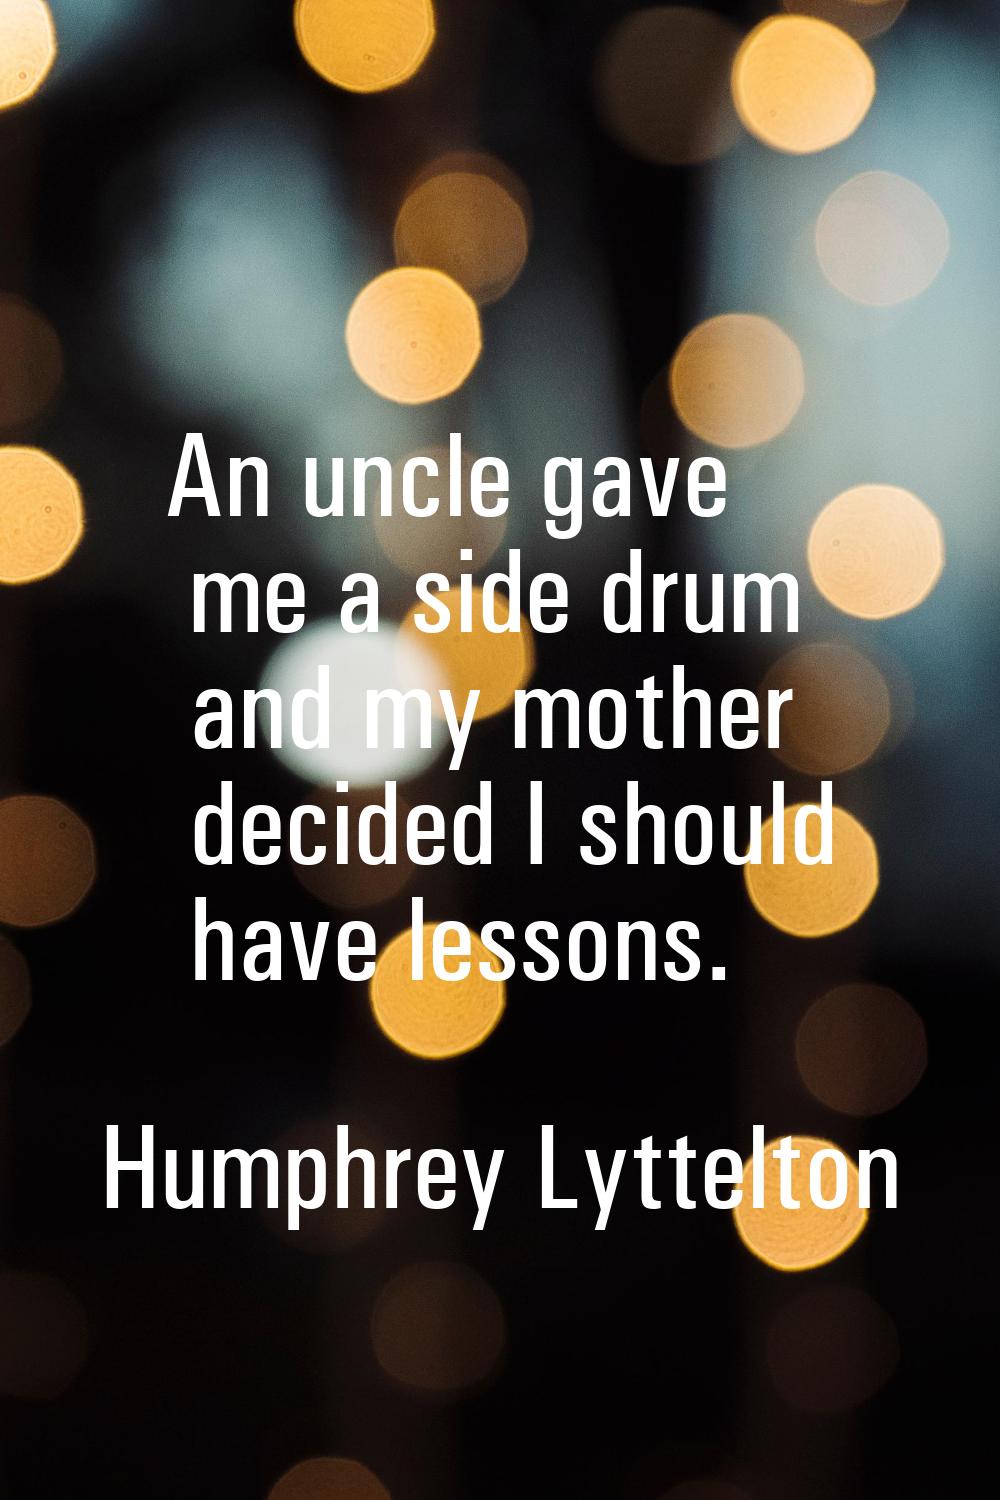 An uncle gave me a side drum and my mother decided I should have lessons.